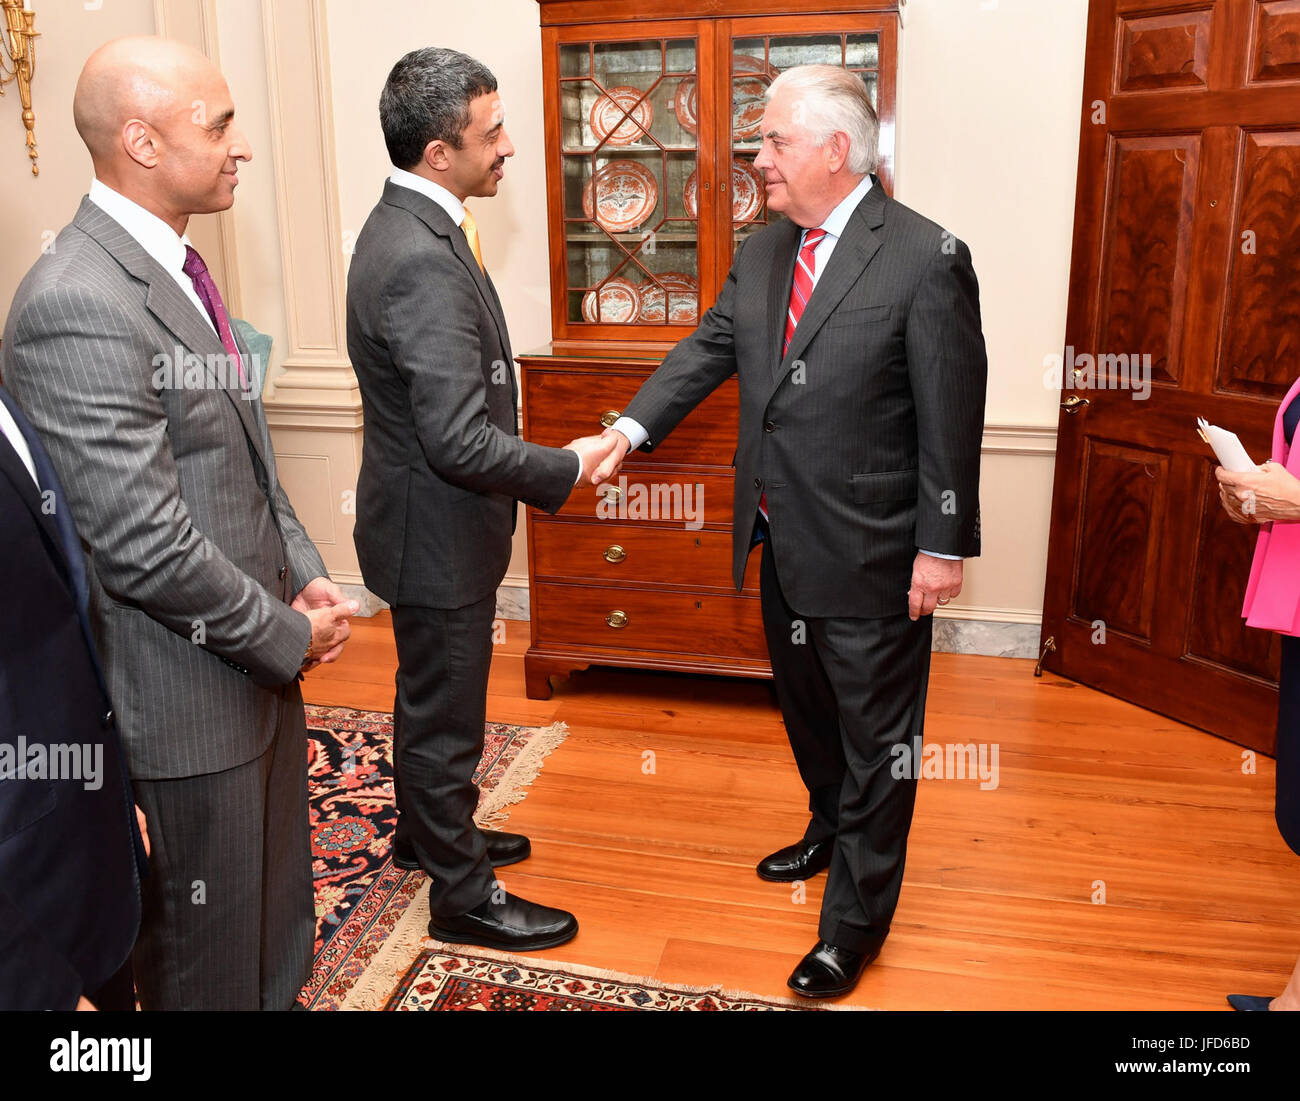 U.S. Secretary of State Rex Tillerson greets UAE Foreign Minister Abdullah bin Zayed Al Nahyan before their working dinner at the U.S. Department of State in Washington, D.C., on June 14, 2017. Stock Photo